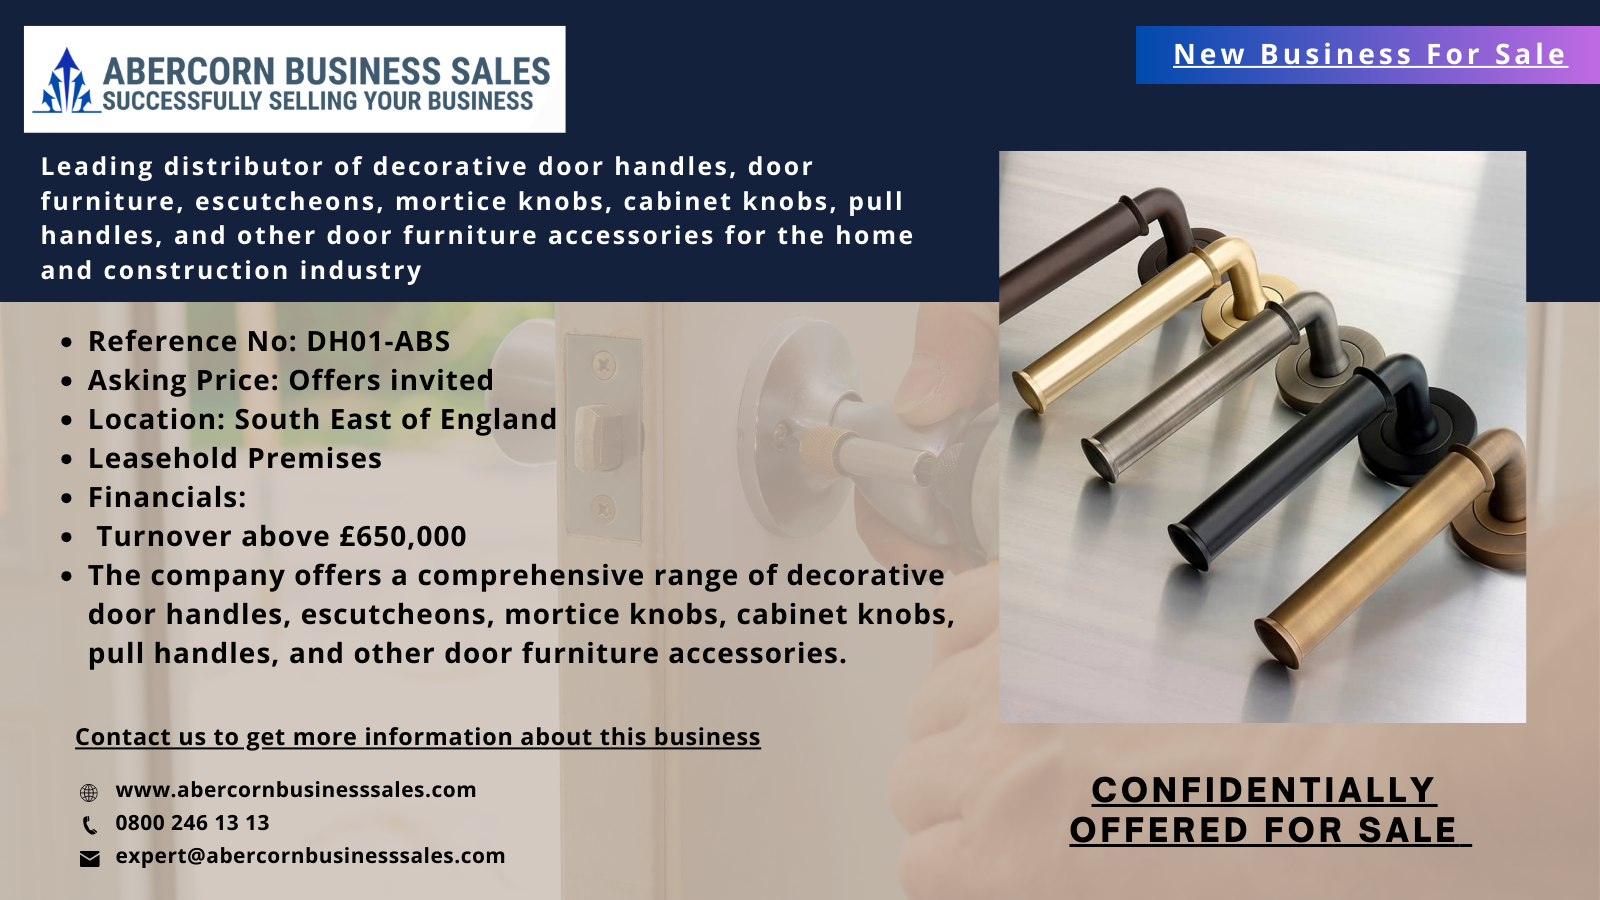 DH01-ABS - Leading Distributor Of Decorative Door Furniture Accessories 